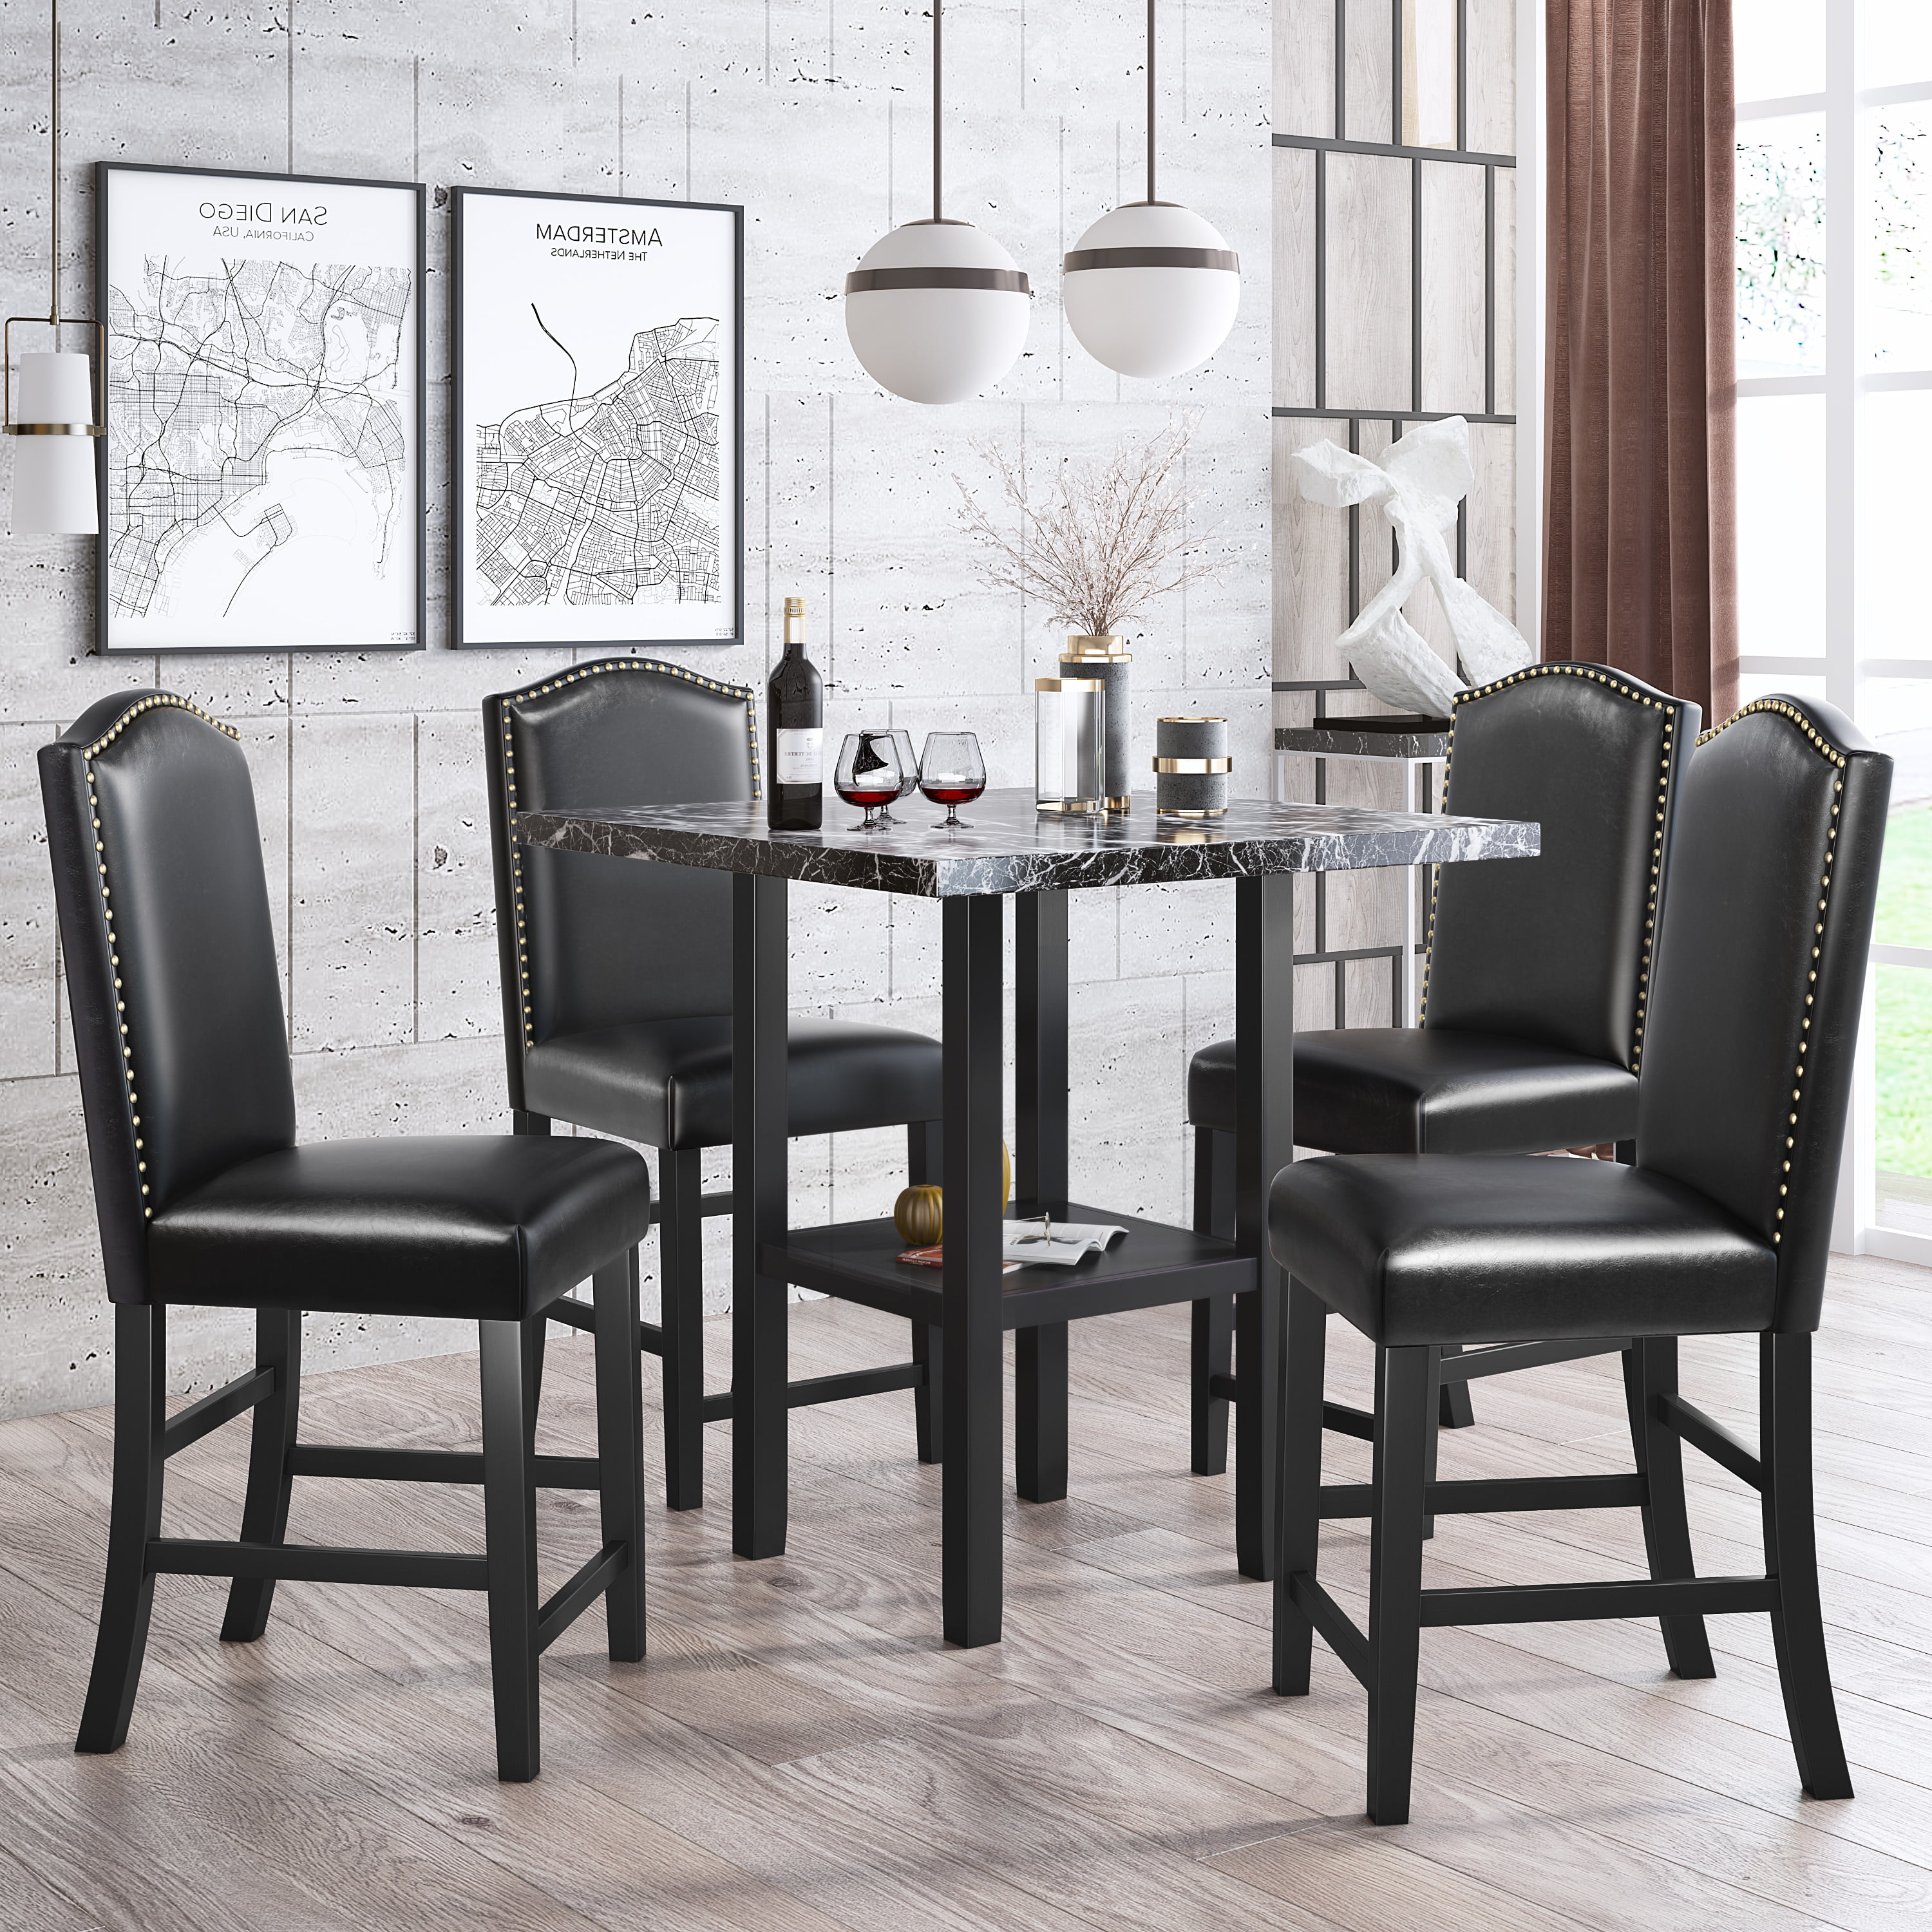 Chair Set Wooden Dining Room Table, Dark Wood Dining Chairs Set Of 4